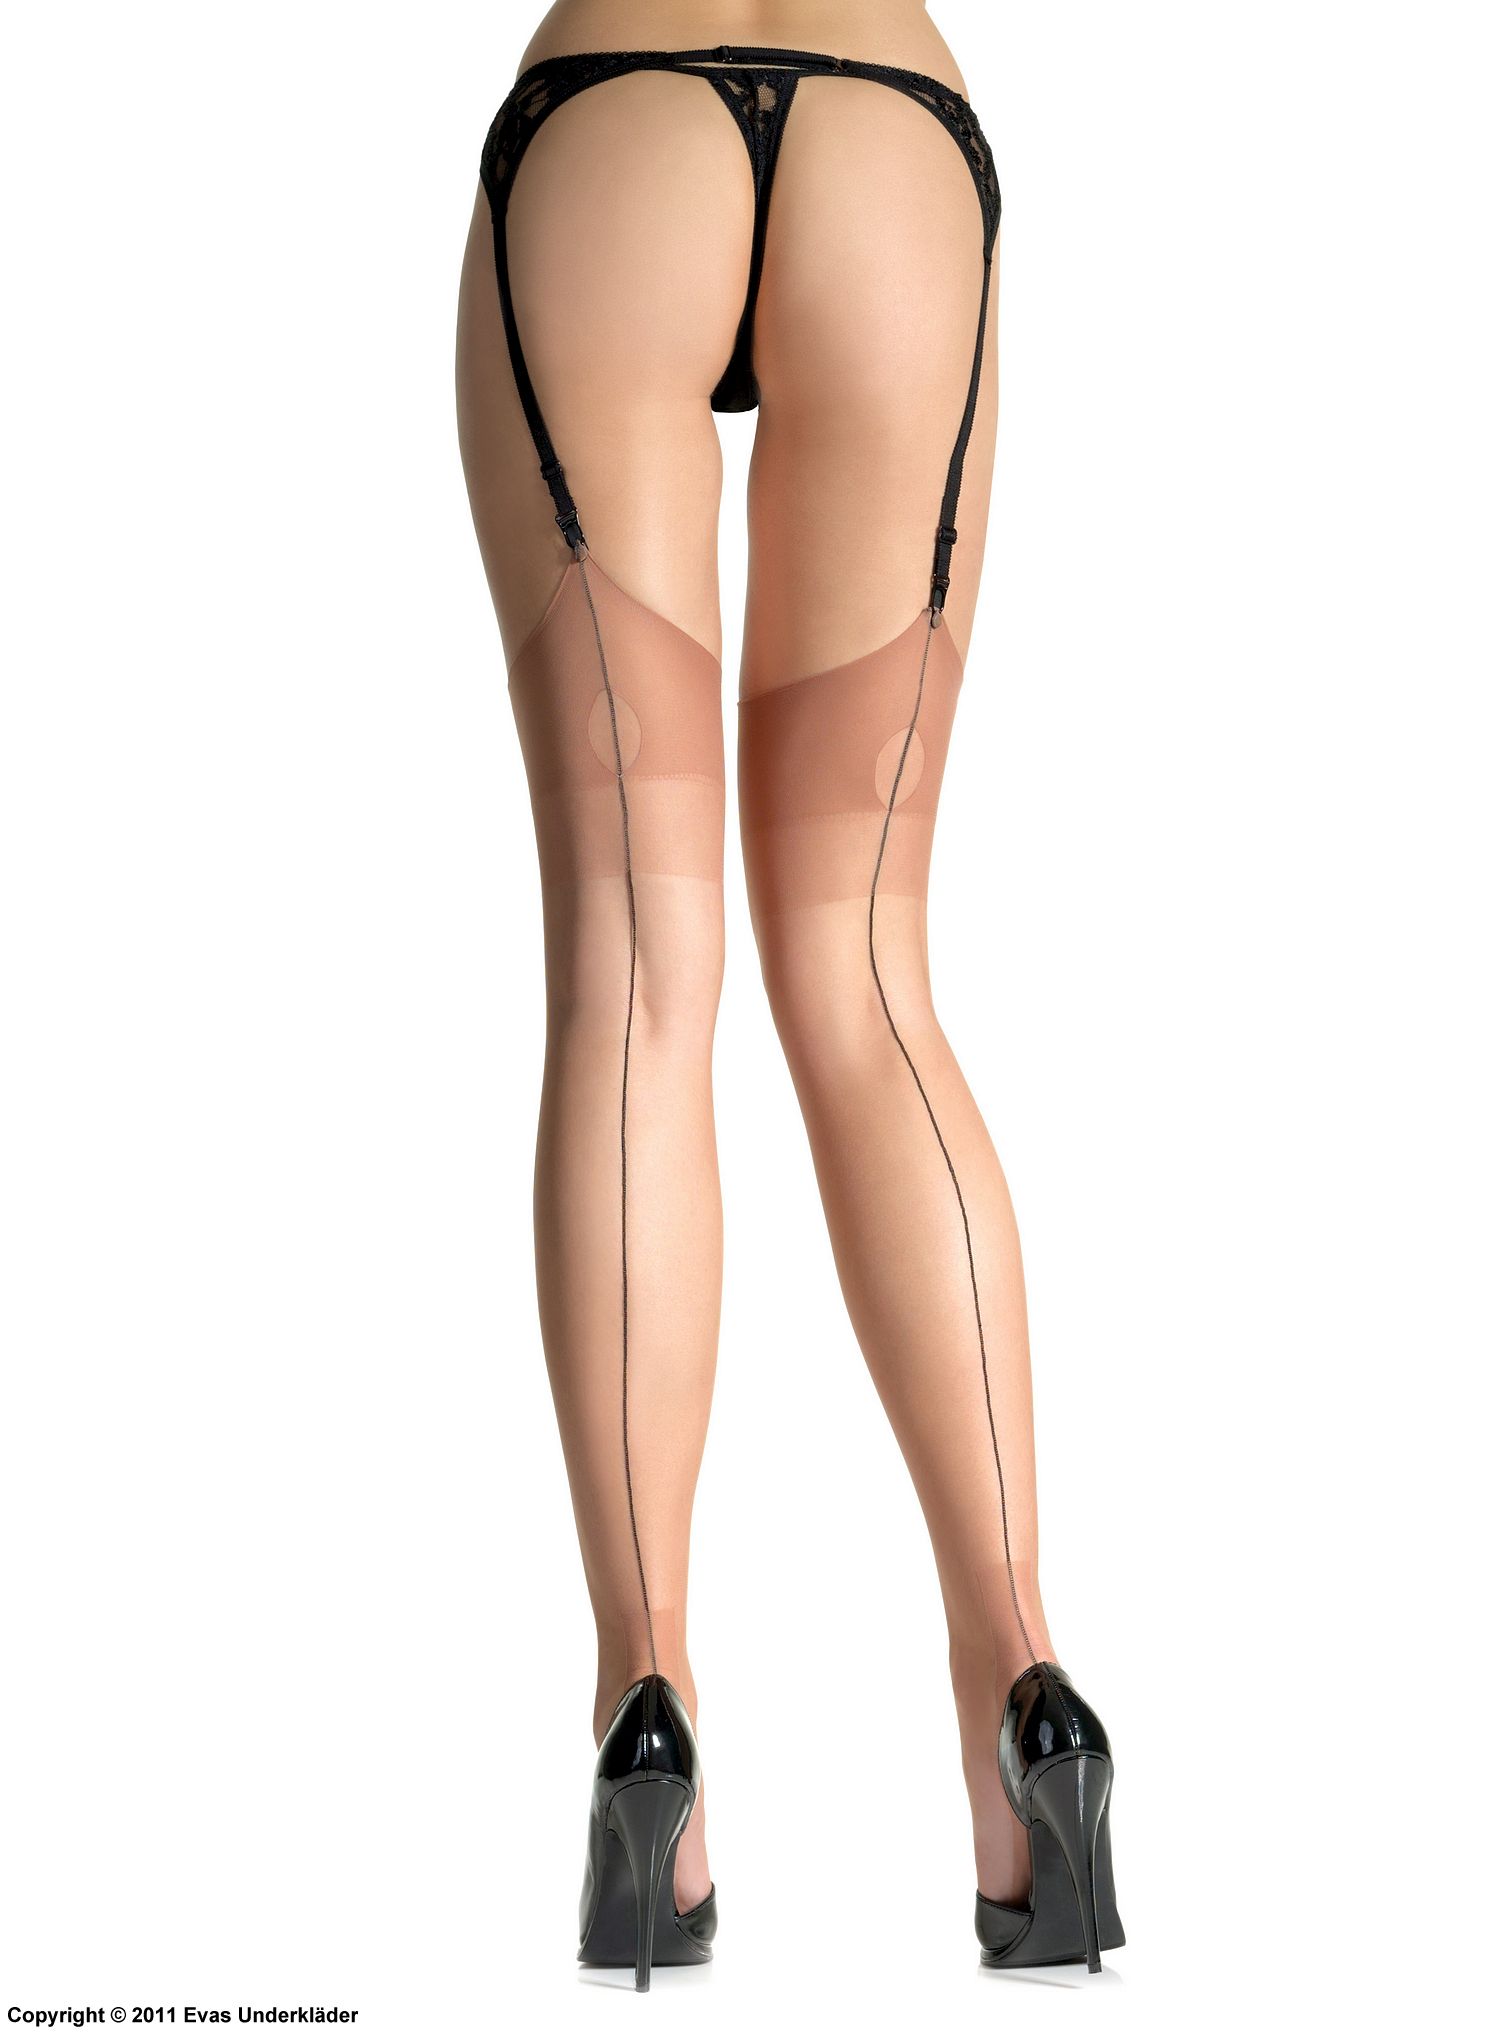 Stockings with visible back seam